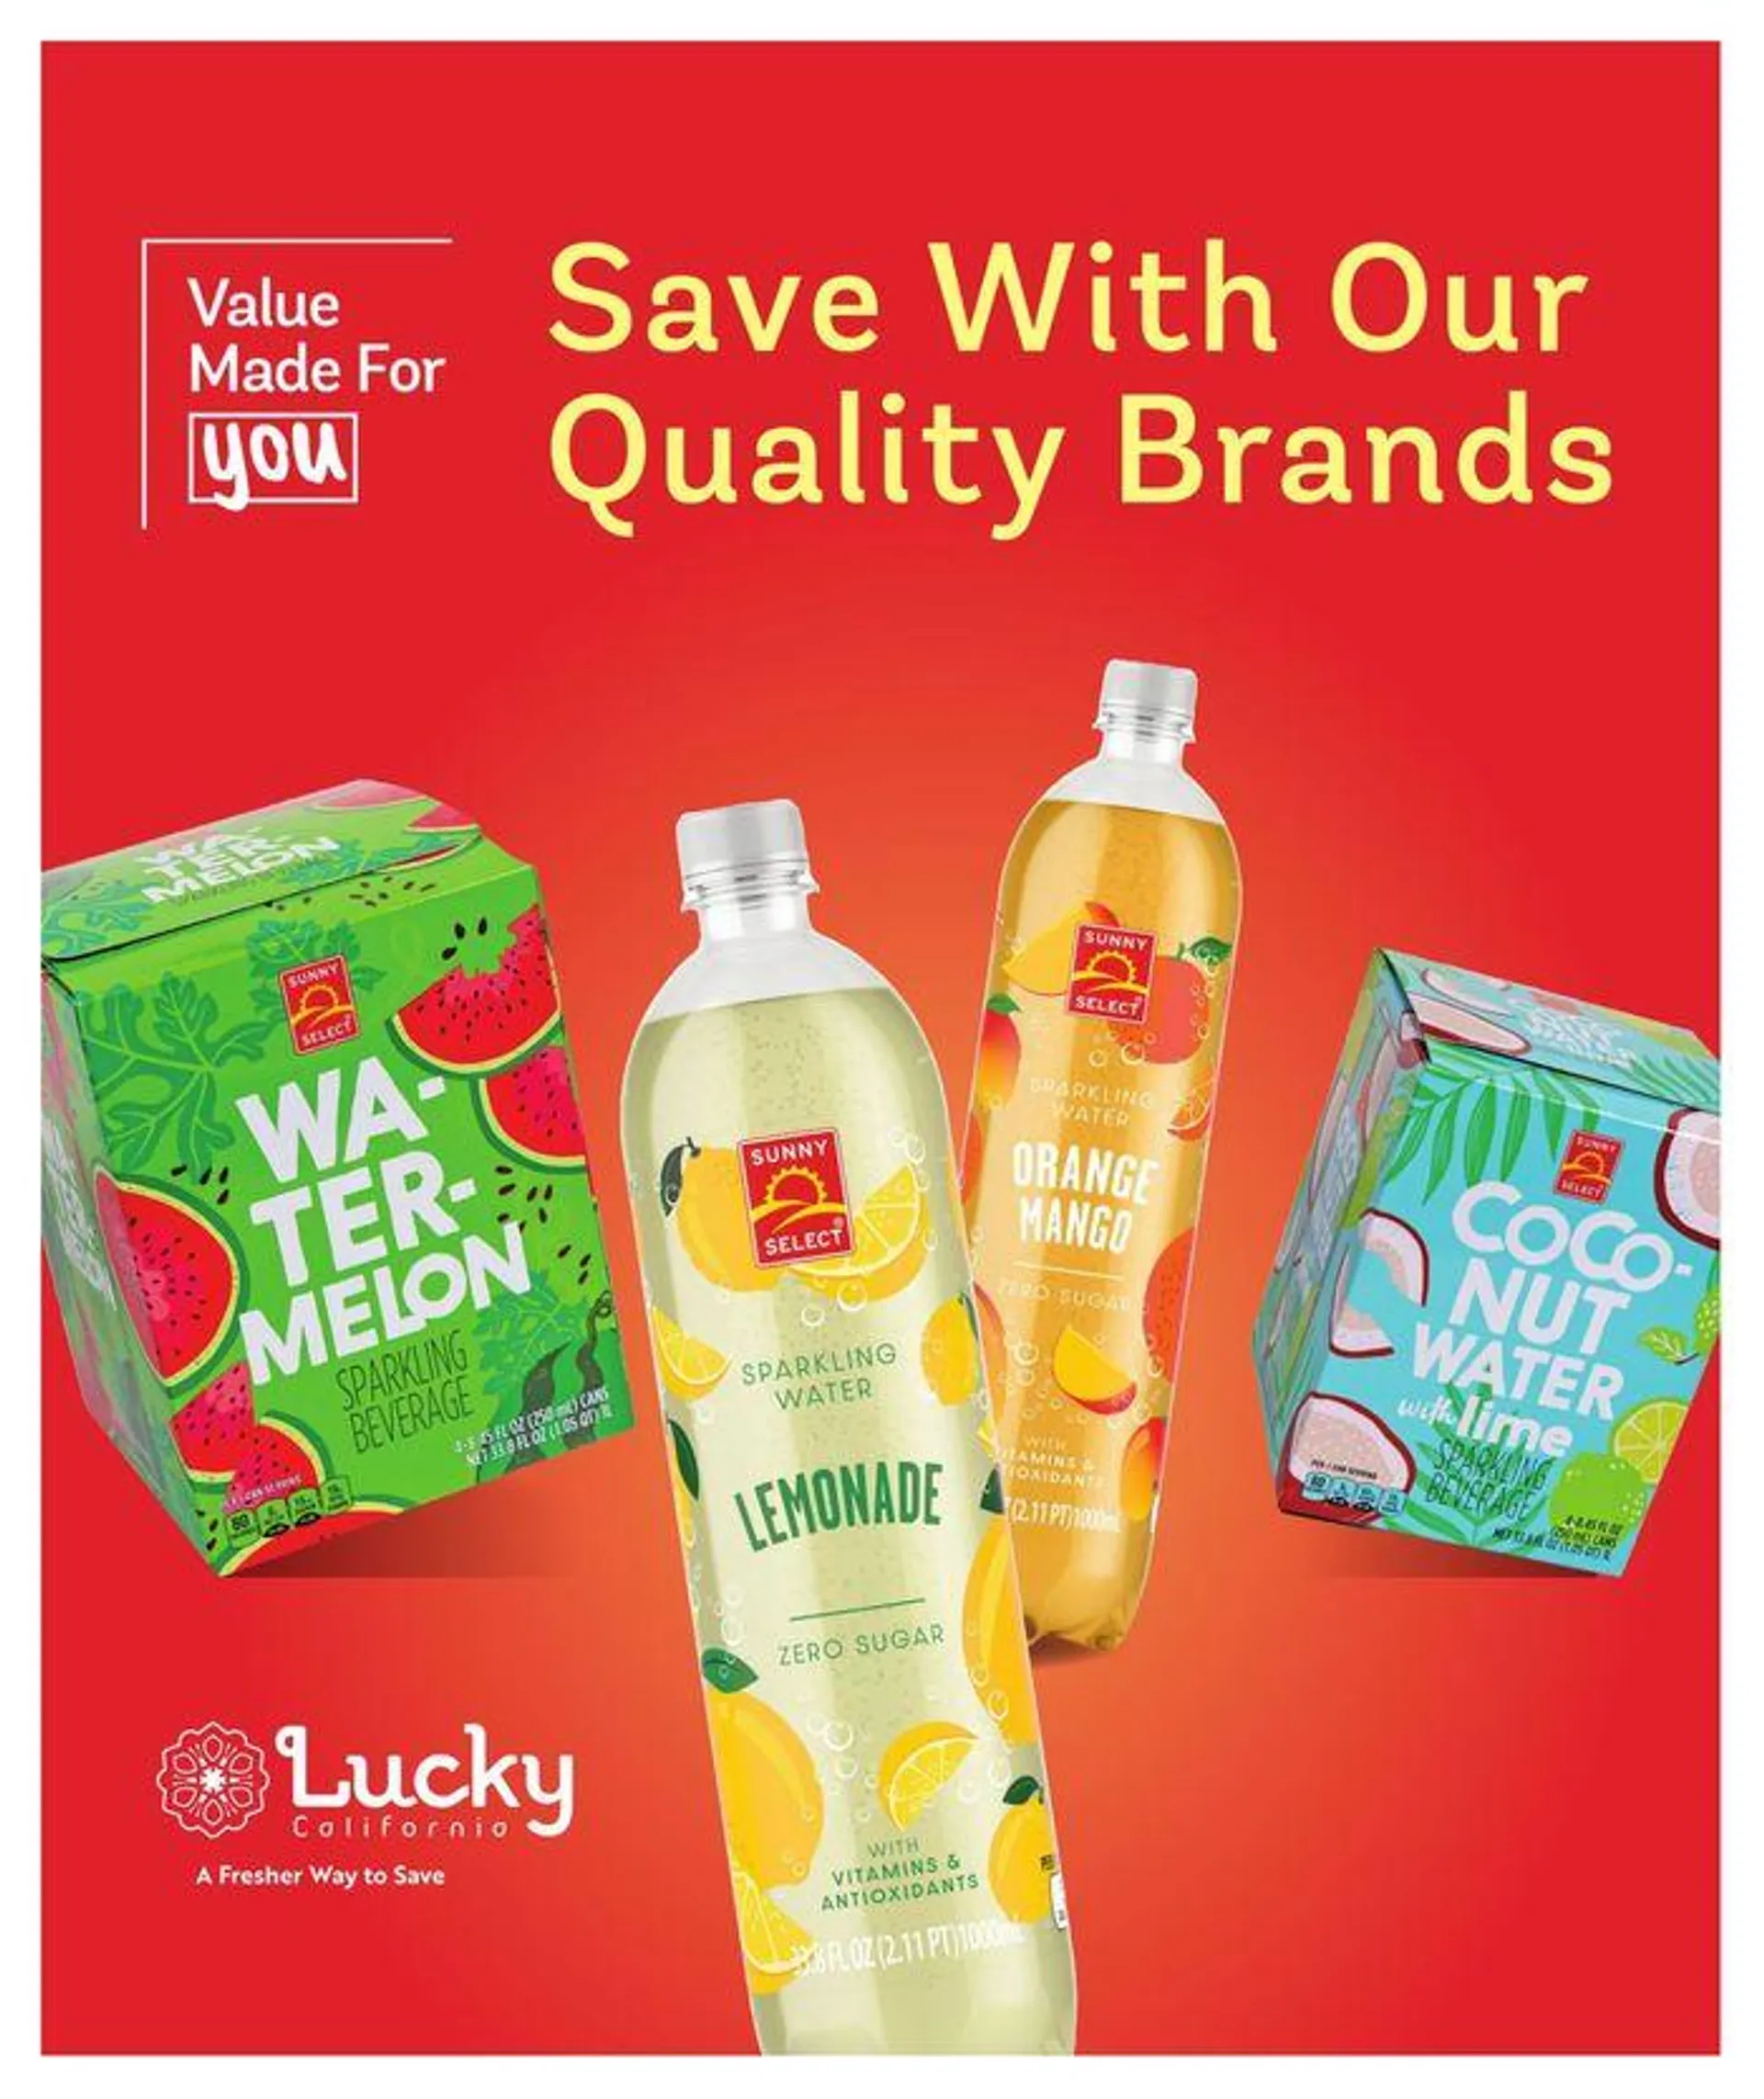 Save With Our Quality Brands - 1